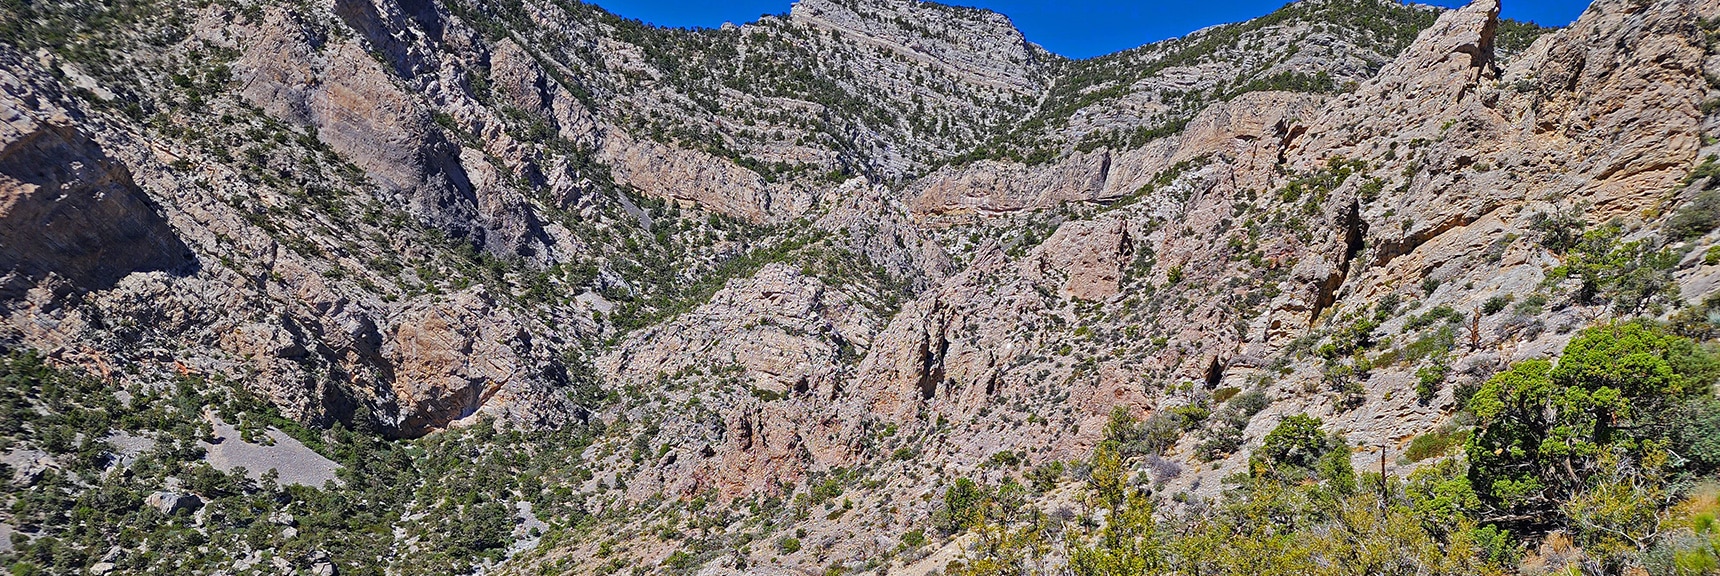 If You Can Weave Through the Cliffs, It's On Toward the Left. Must Get a Closer Look | Kyle Canyon Grand Crossing | Southern Half | Red Rock Canyon National Conservation Area, Nevada